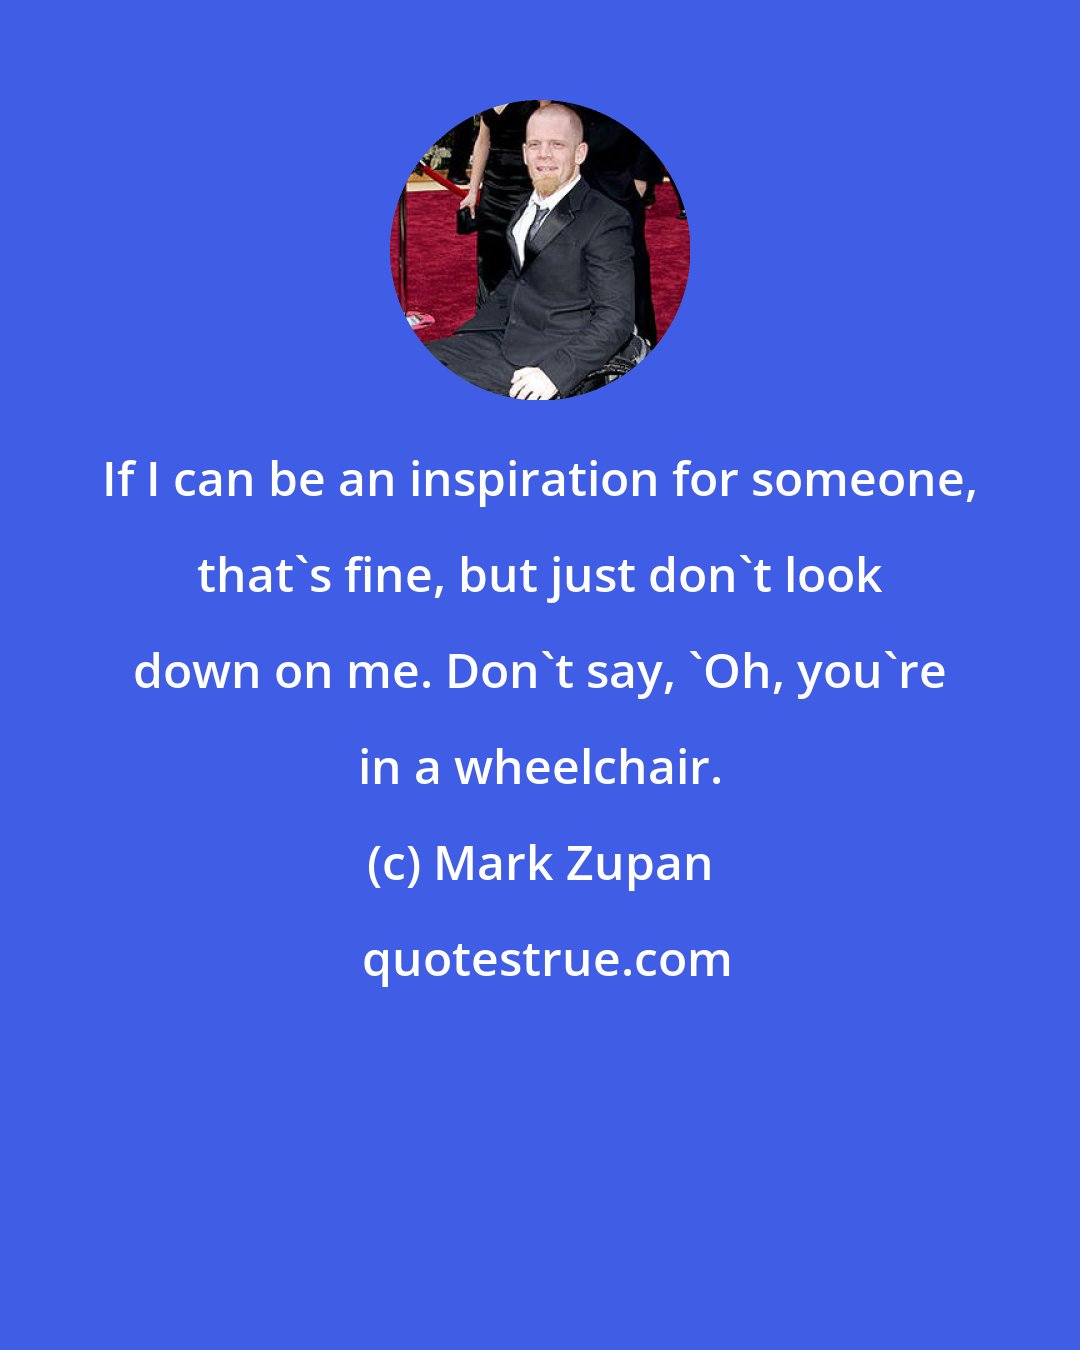 Mark Zupan: If I can be an inspiration for someone, that's fine, but just don't look down on me. Don't say, 'Oh, you're in a wheelchair.